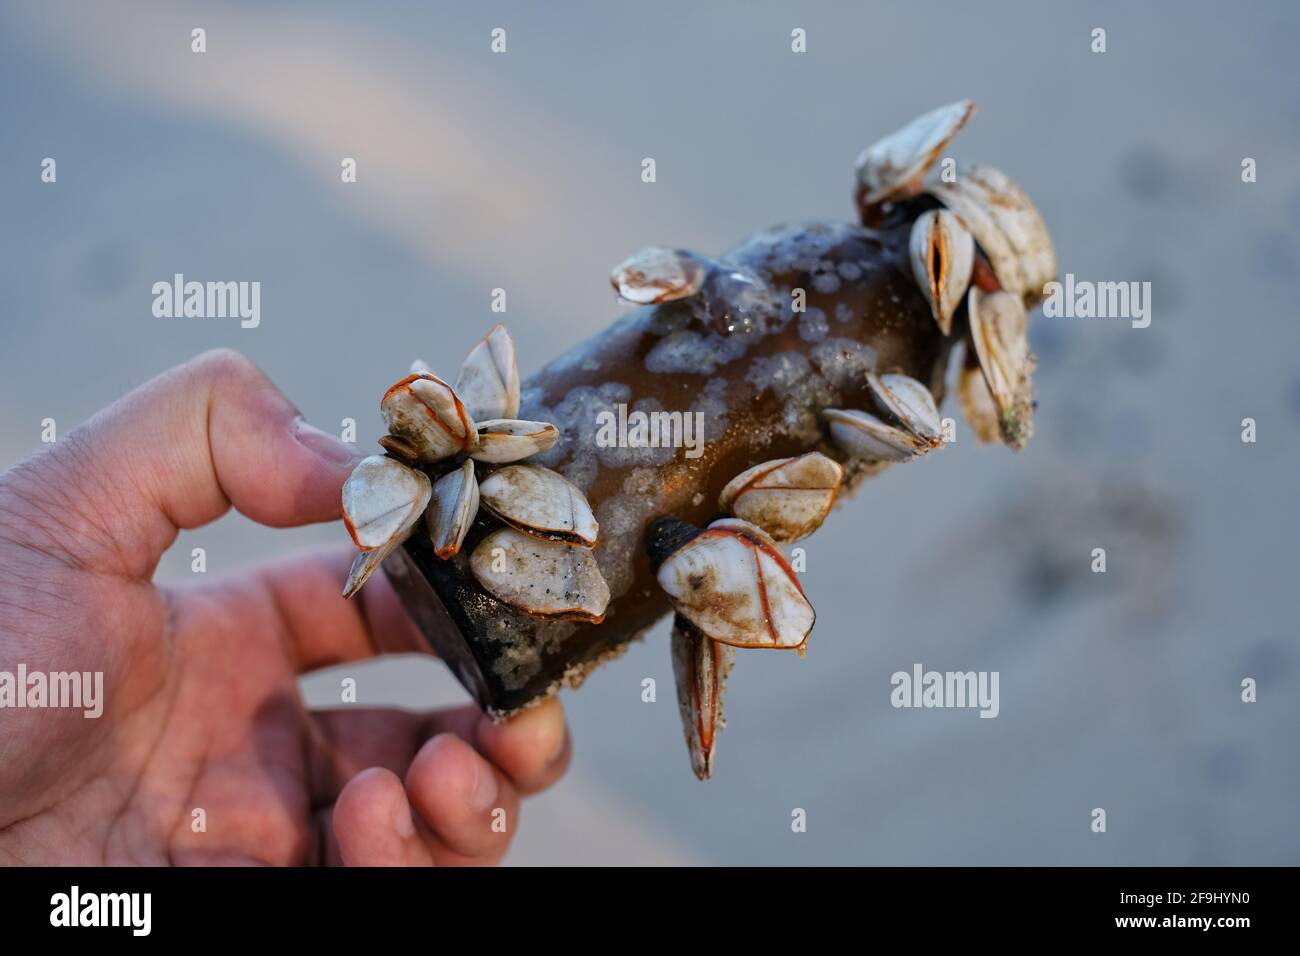 A hand picking up a thrown away glass bottle full of barnacles at a beach, cleaning up the trash to save the environment. Stock Photo